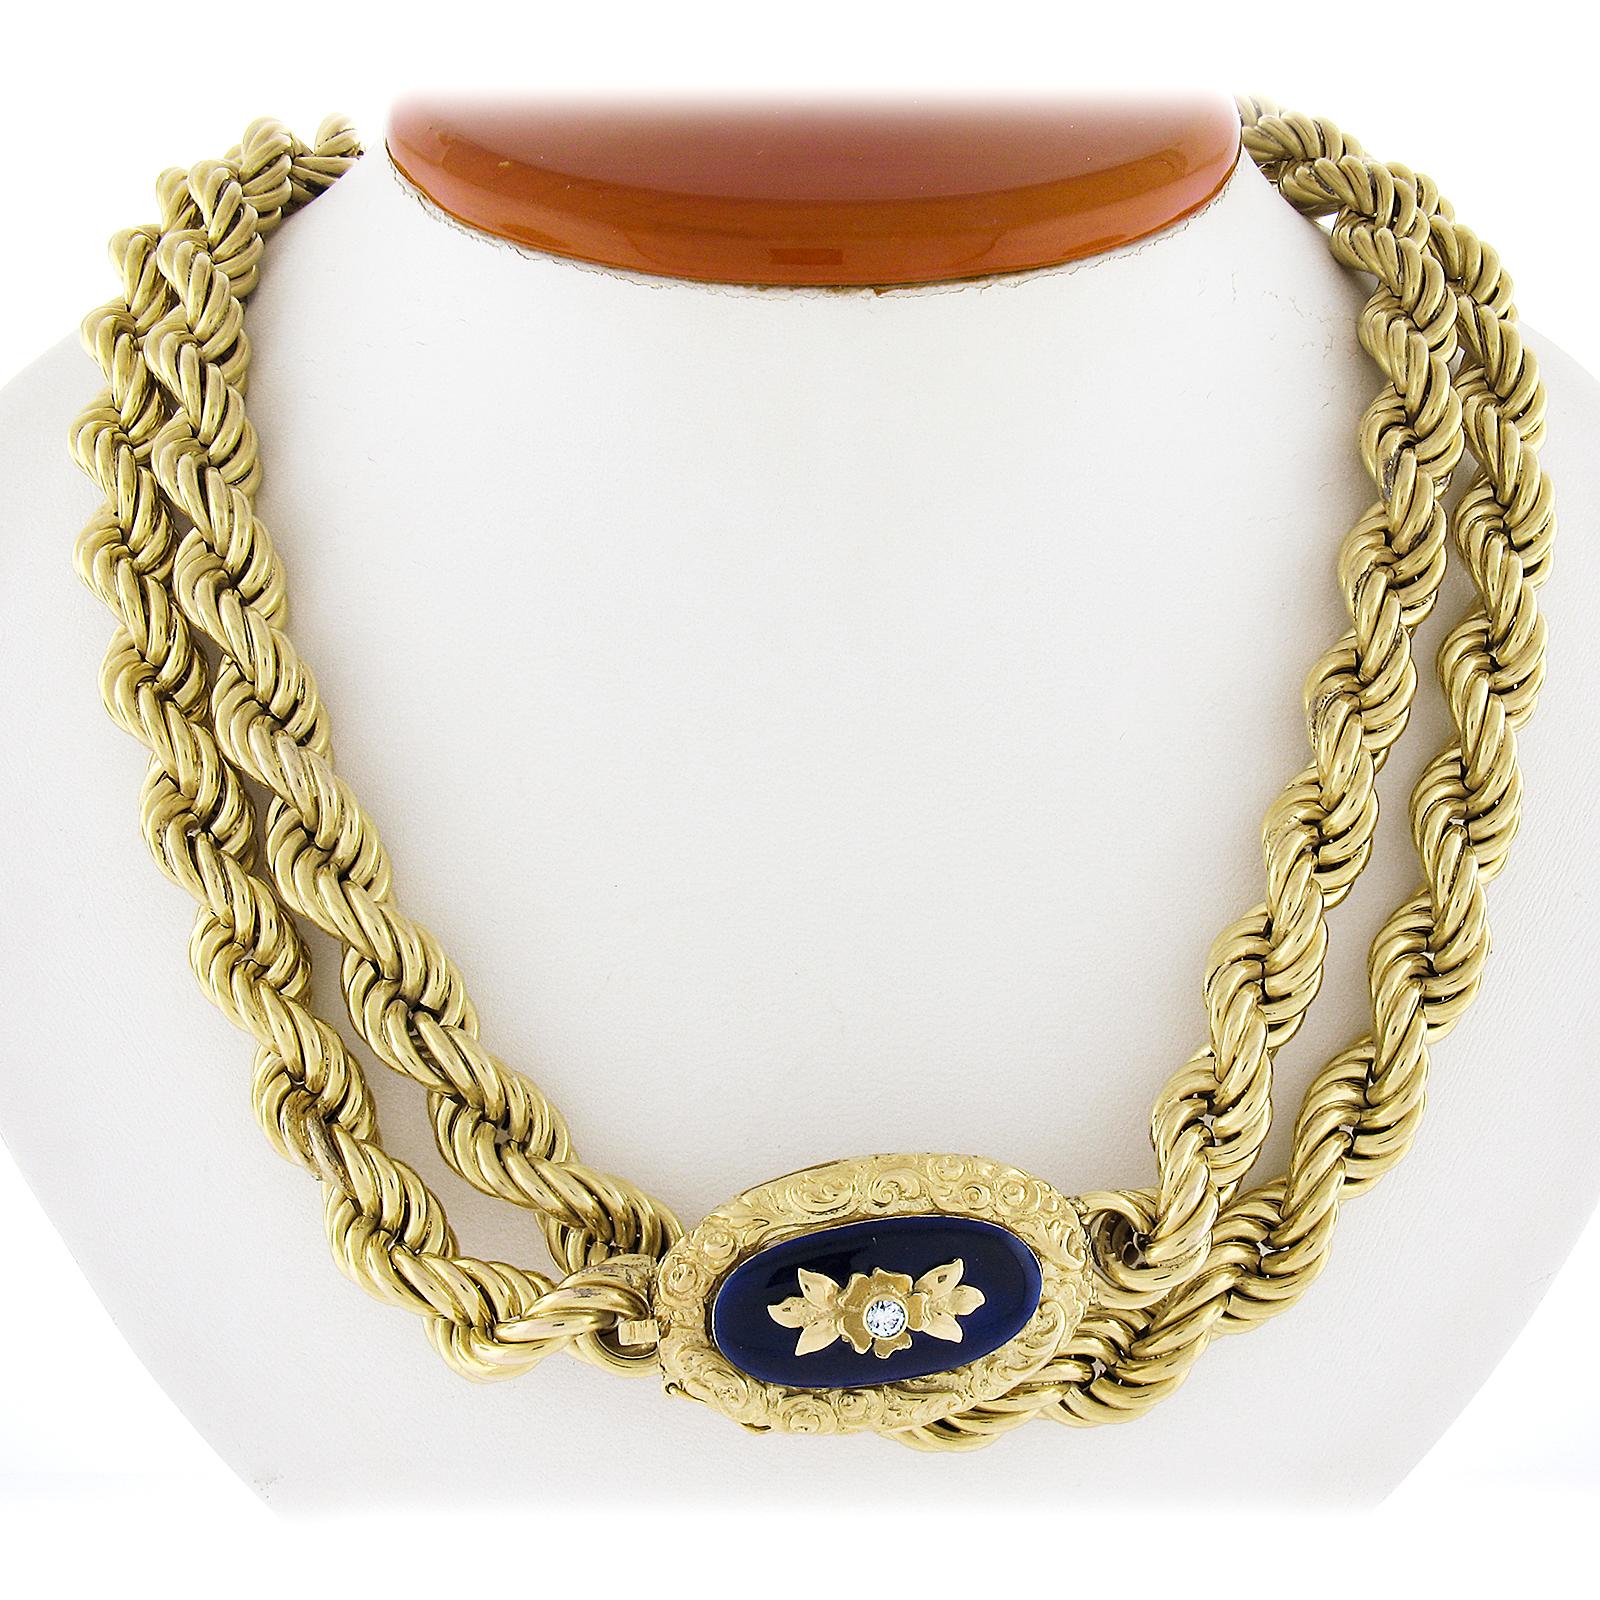 --Stone(s):--
(1) Natural Genuine Diamond - Old European Cut - Bezel Set - H Color - VS2 Clarity - 0.10ct (approx.)

Material: 14K Solid Yellow Gold Rope Chain & Gold Wash w/ 18K Yellow Gold Clasp
Weight: 165.58 Grams
Chain Type: Rope Link
Chain